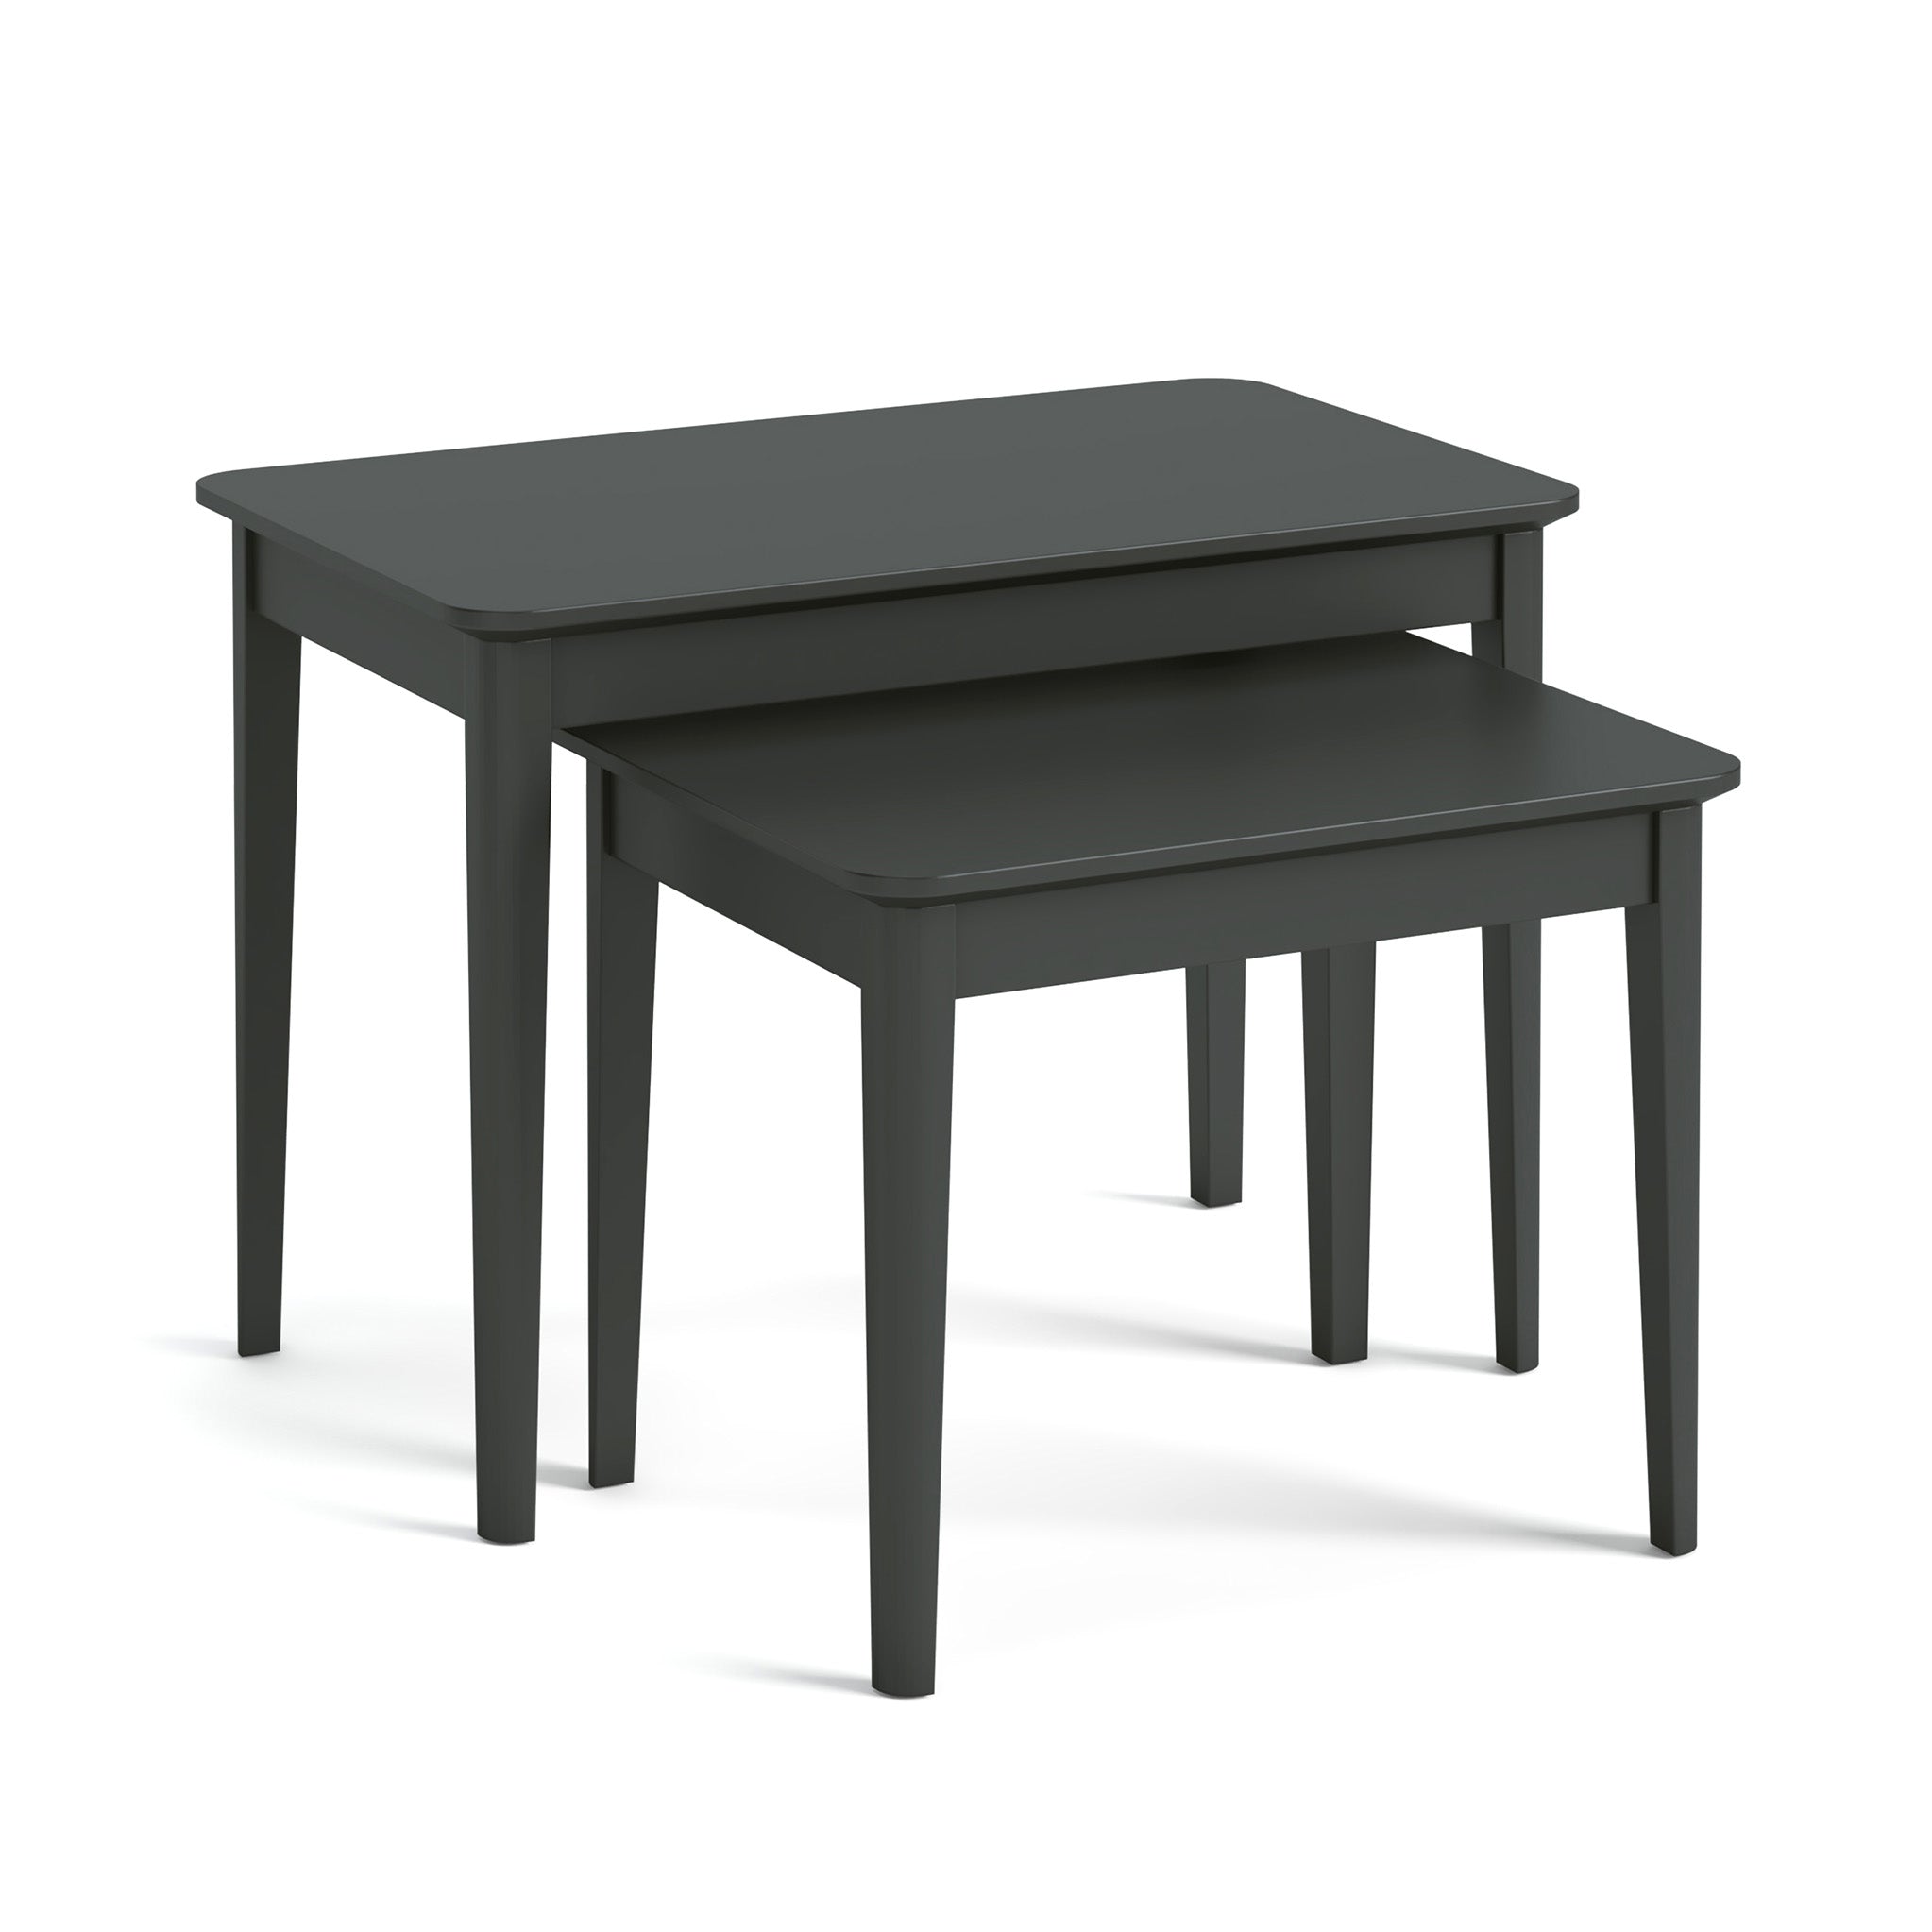 Dumbarton Charcoal Grey Nest Of Tables 2 Solid Wood Nesting Units For Living Room Contemporary Scandi Painted Wooden Side Stands